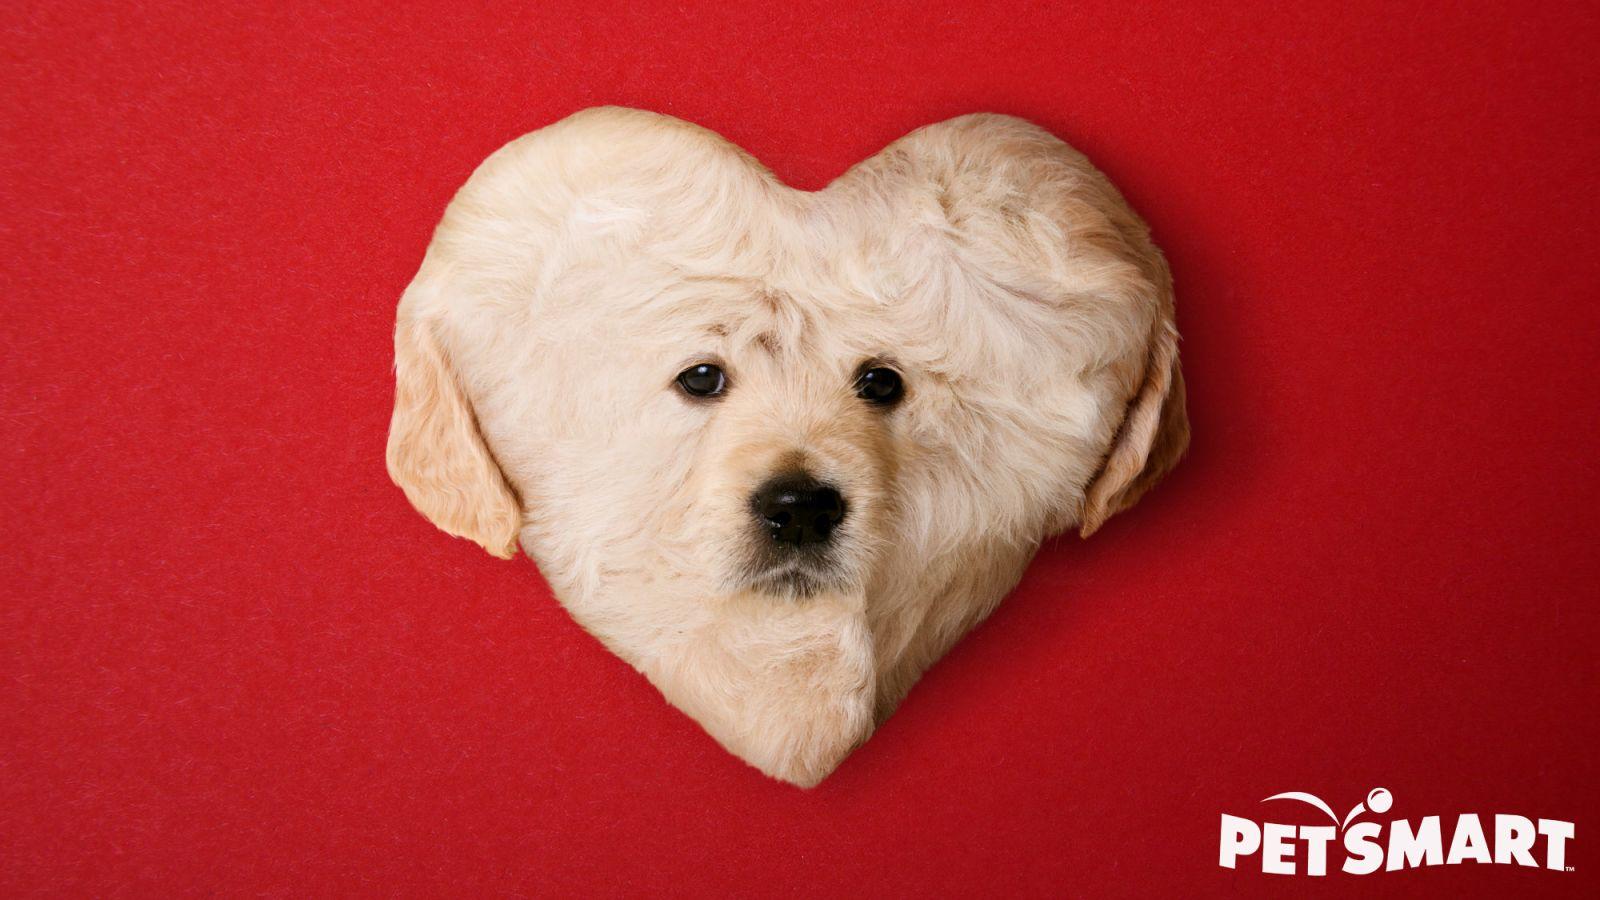 PetSmart Introduces Heart Shaped Puppy For Valentine's Day